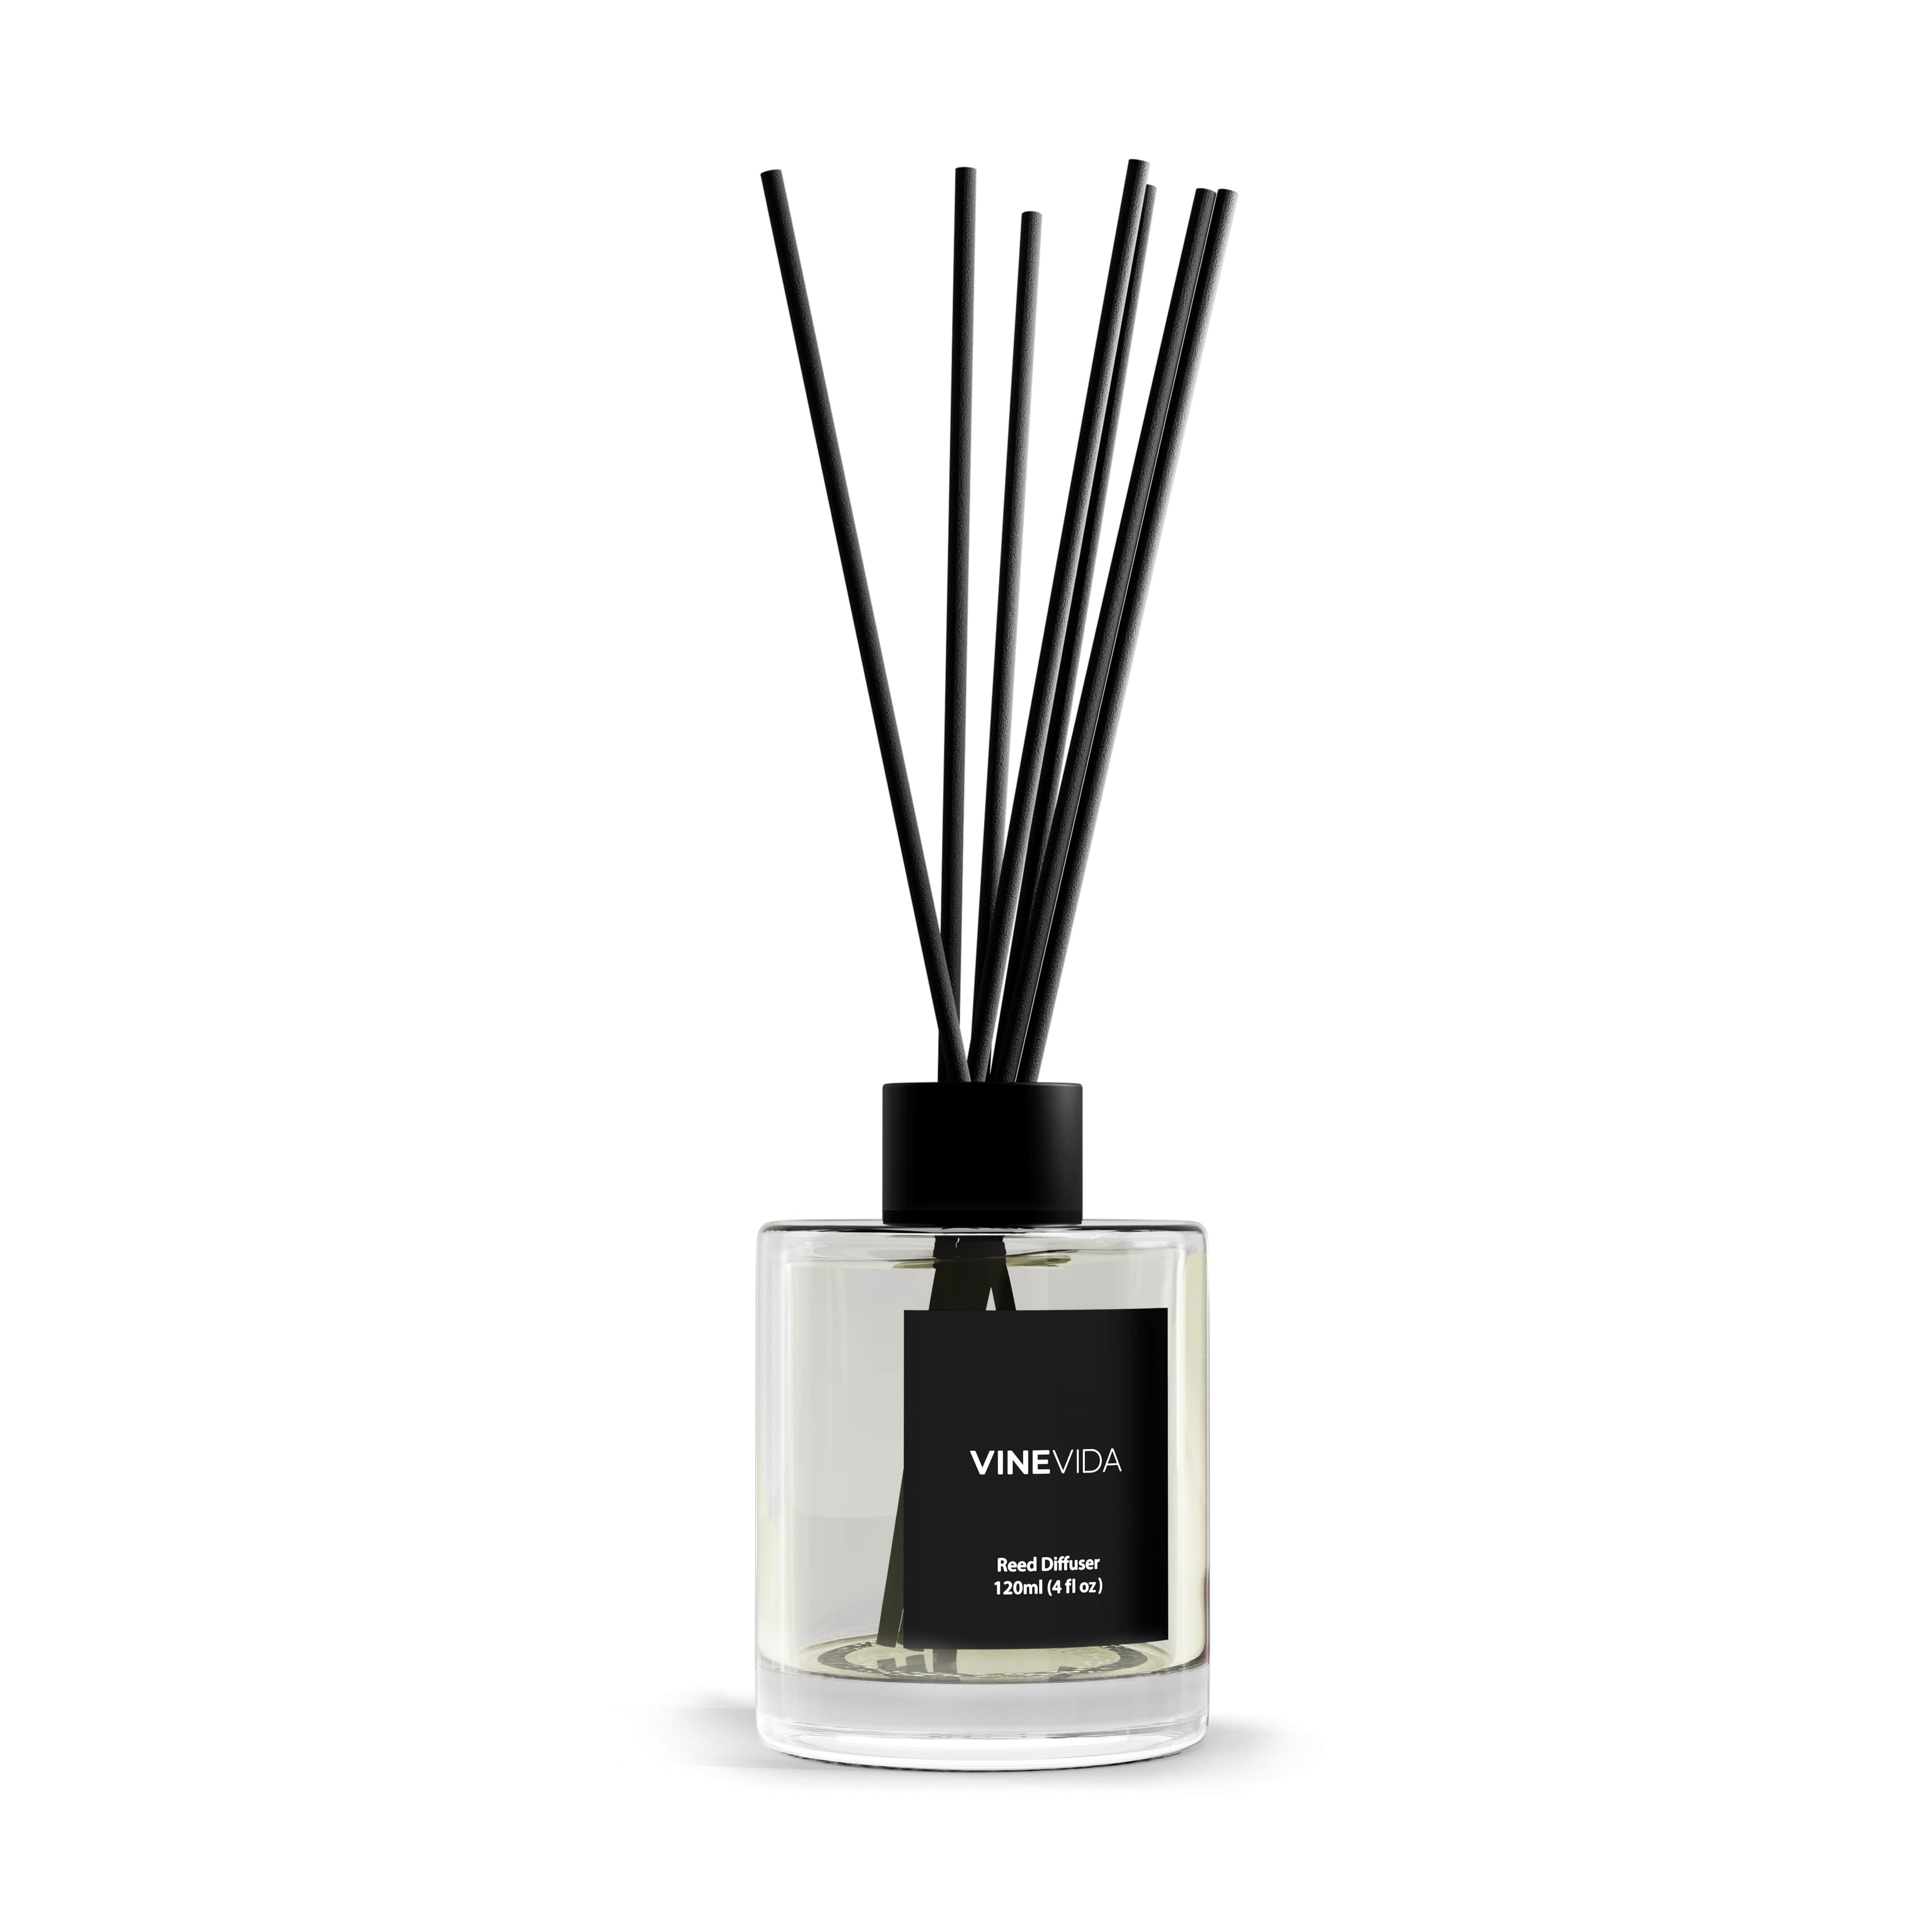 NO. 1112 Reed Diffuser - Inspired by: Eucalyptus Spearmint by Bath & Body Works